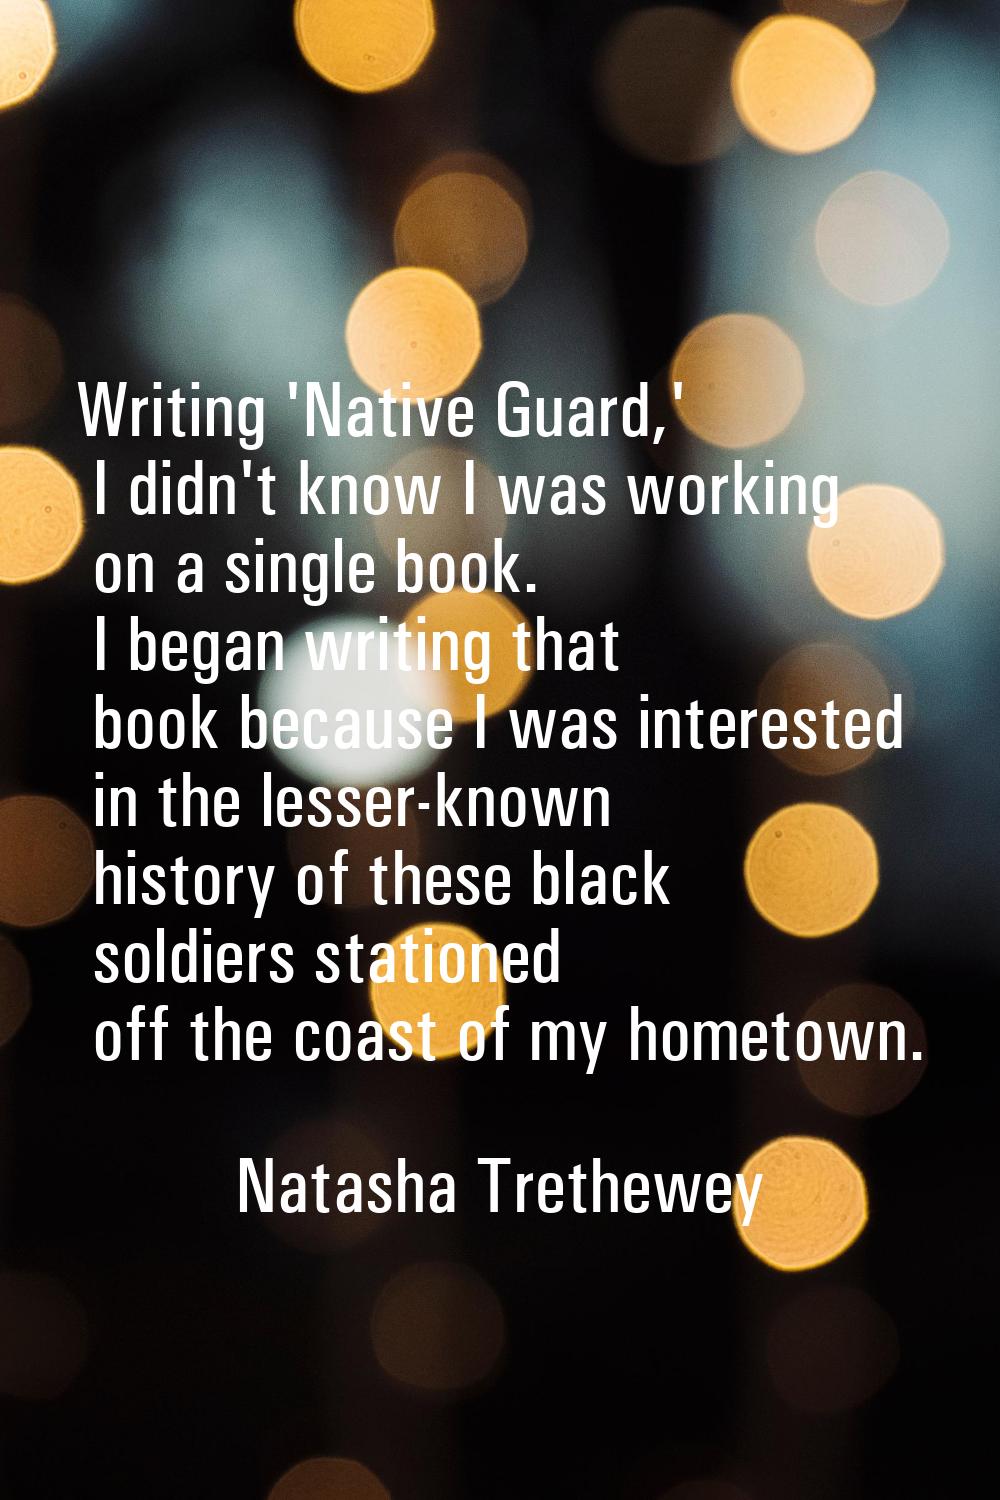 Writing 'Native Guard,' I didn't know I was working on a single book. I began writing that book bec